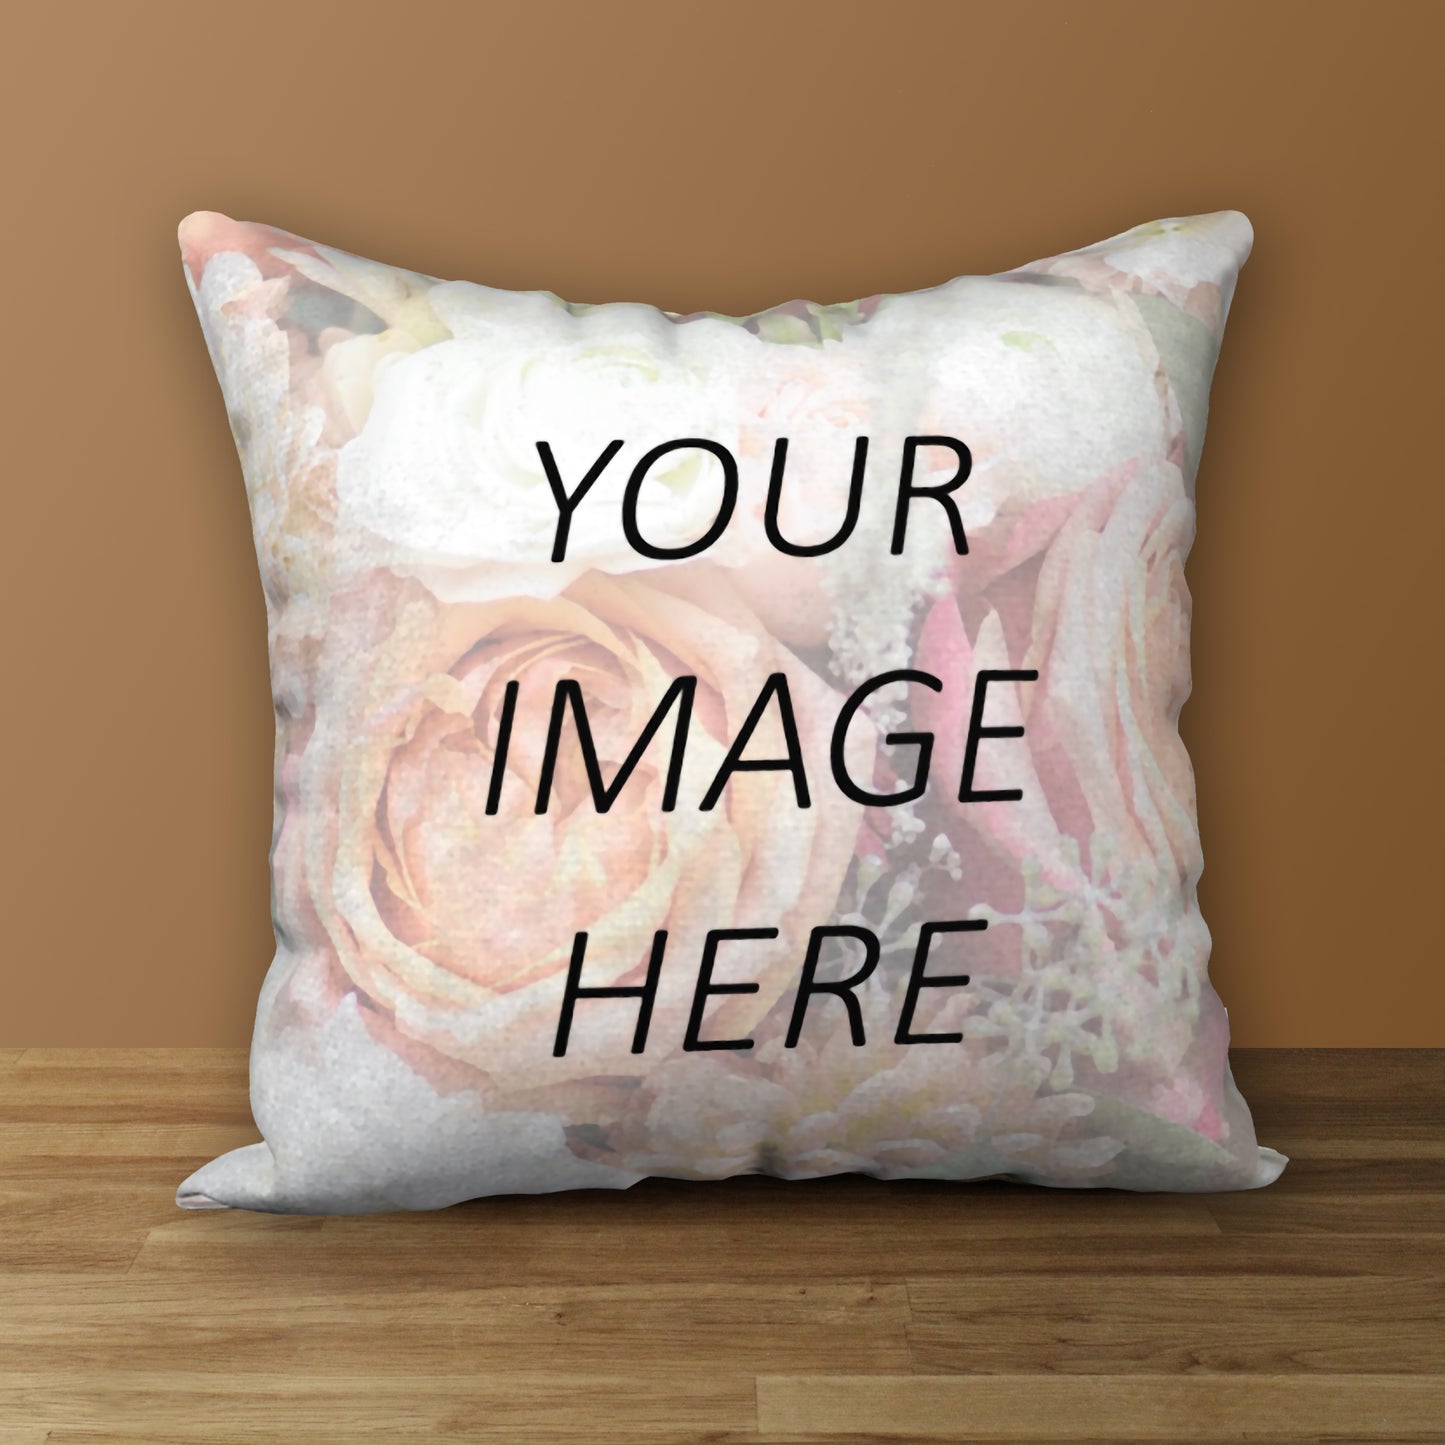 Personalized Photo Pillow Made to Order, 20"x14" or 18"x18"